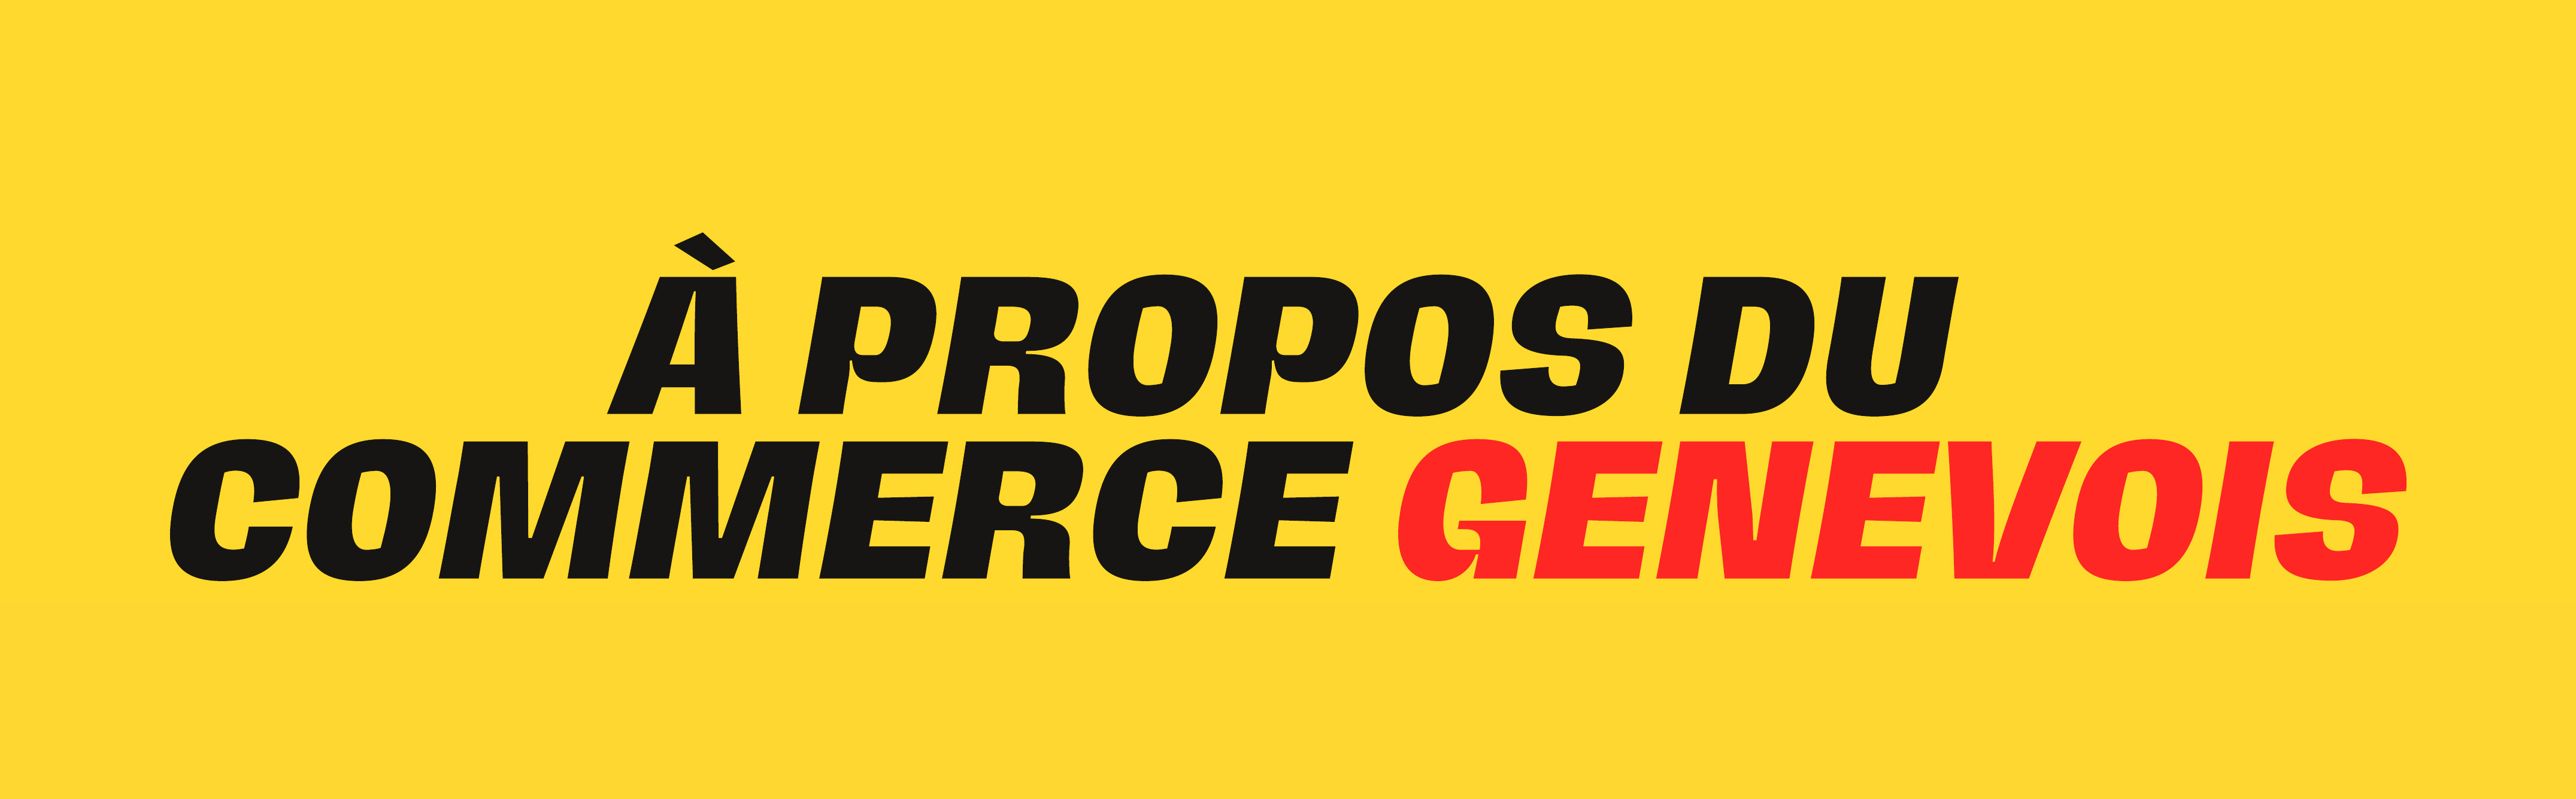 a propos commerce genevois